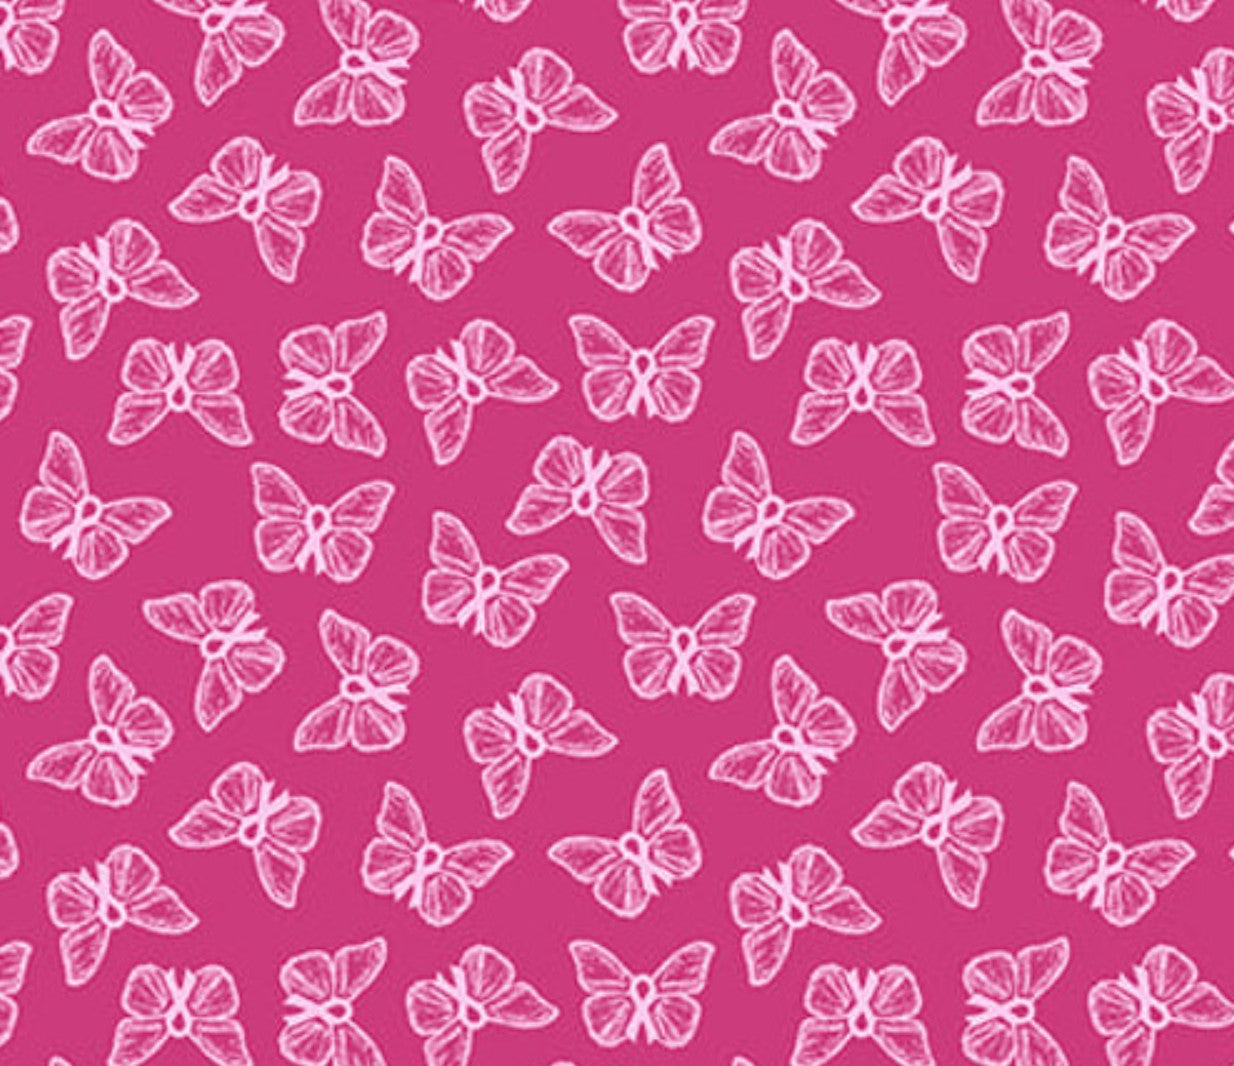 45 x 36 Breast Cancer Awareness Butterflies Ribbons Pink Celebration 100% Cotton